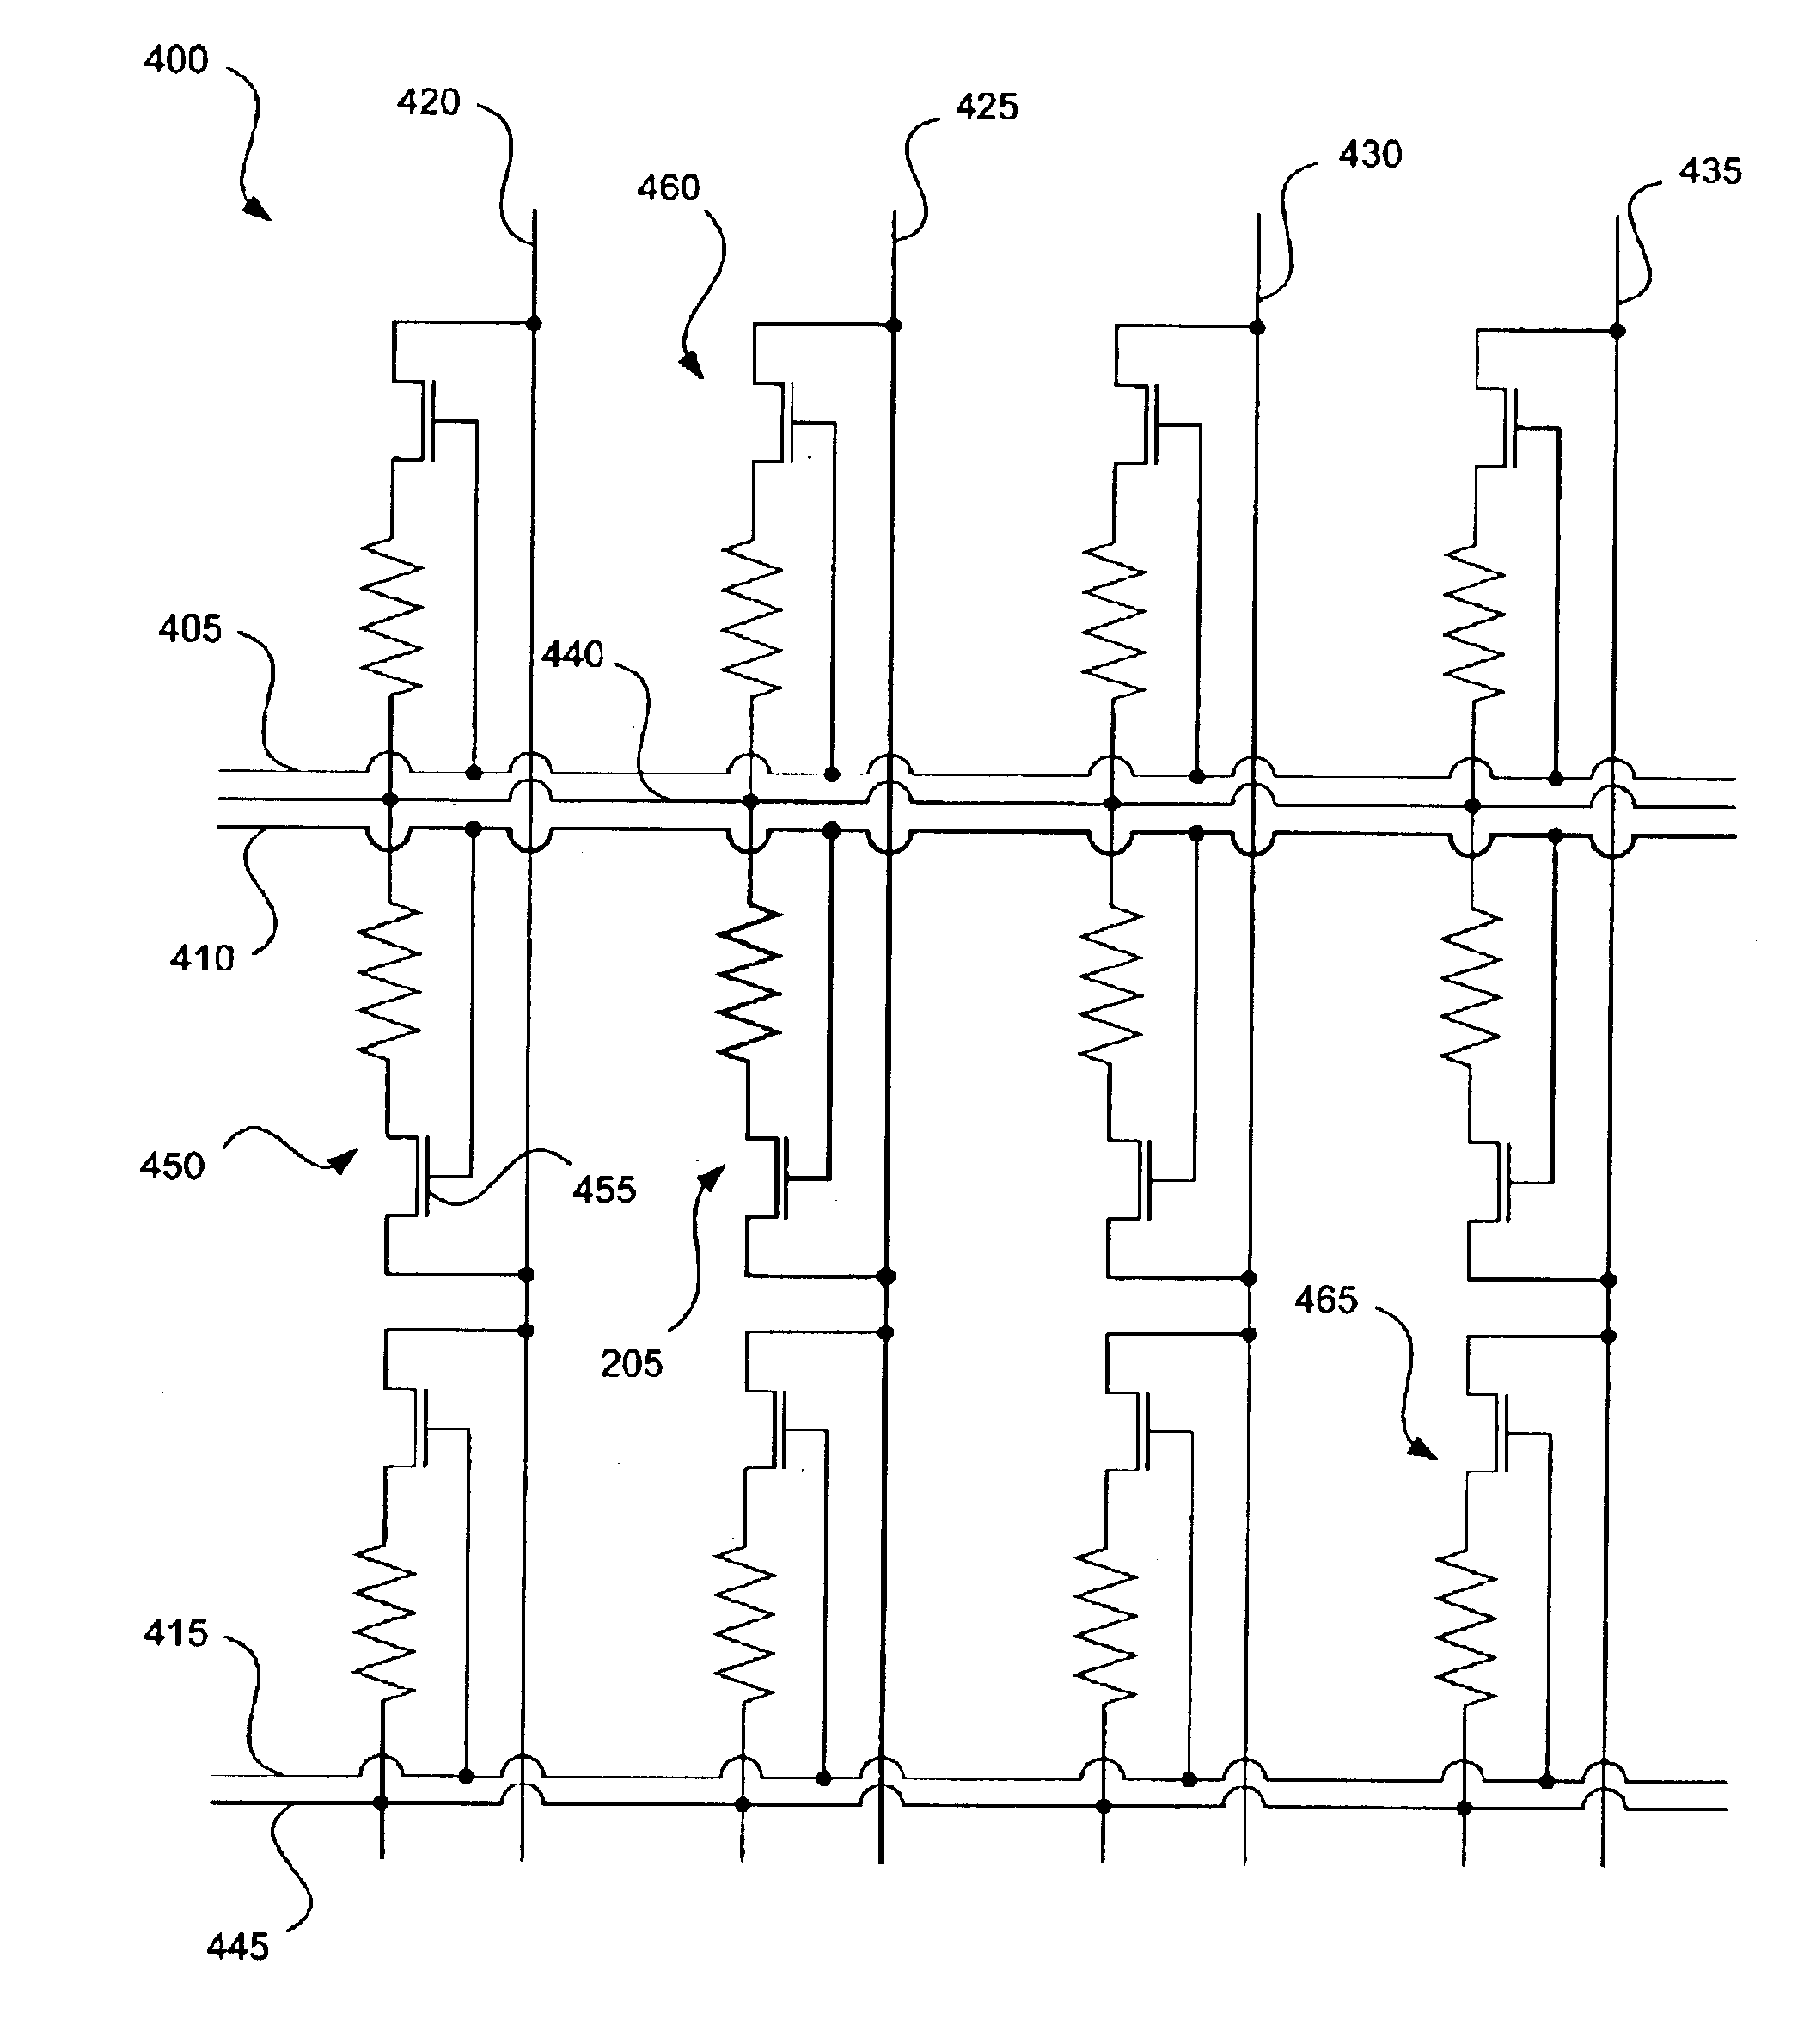 Non-volatile memory with a single transistor and resistive memory element